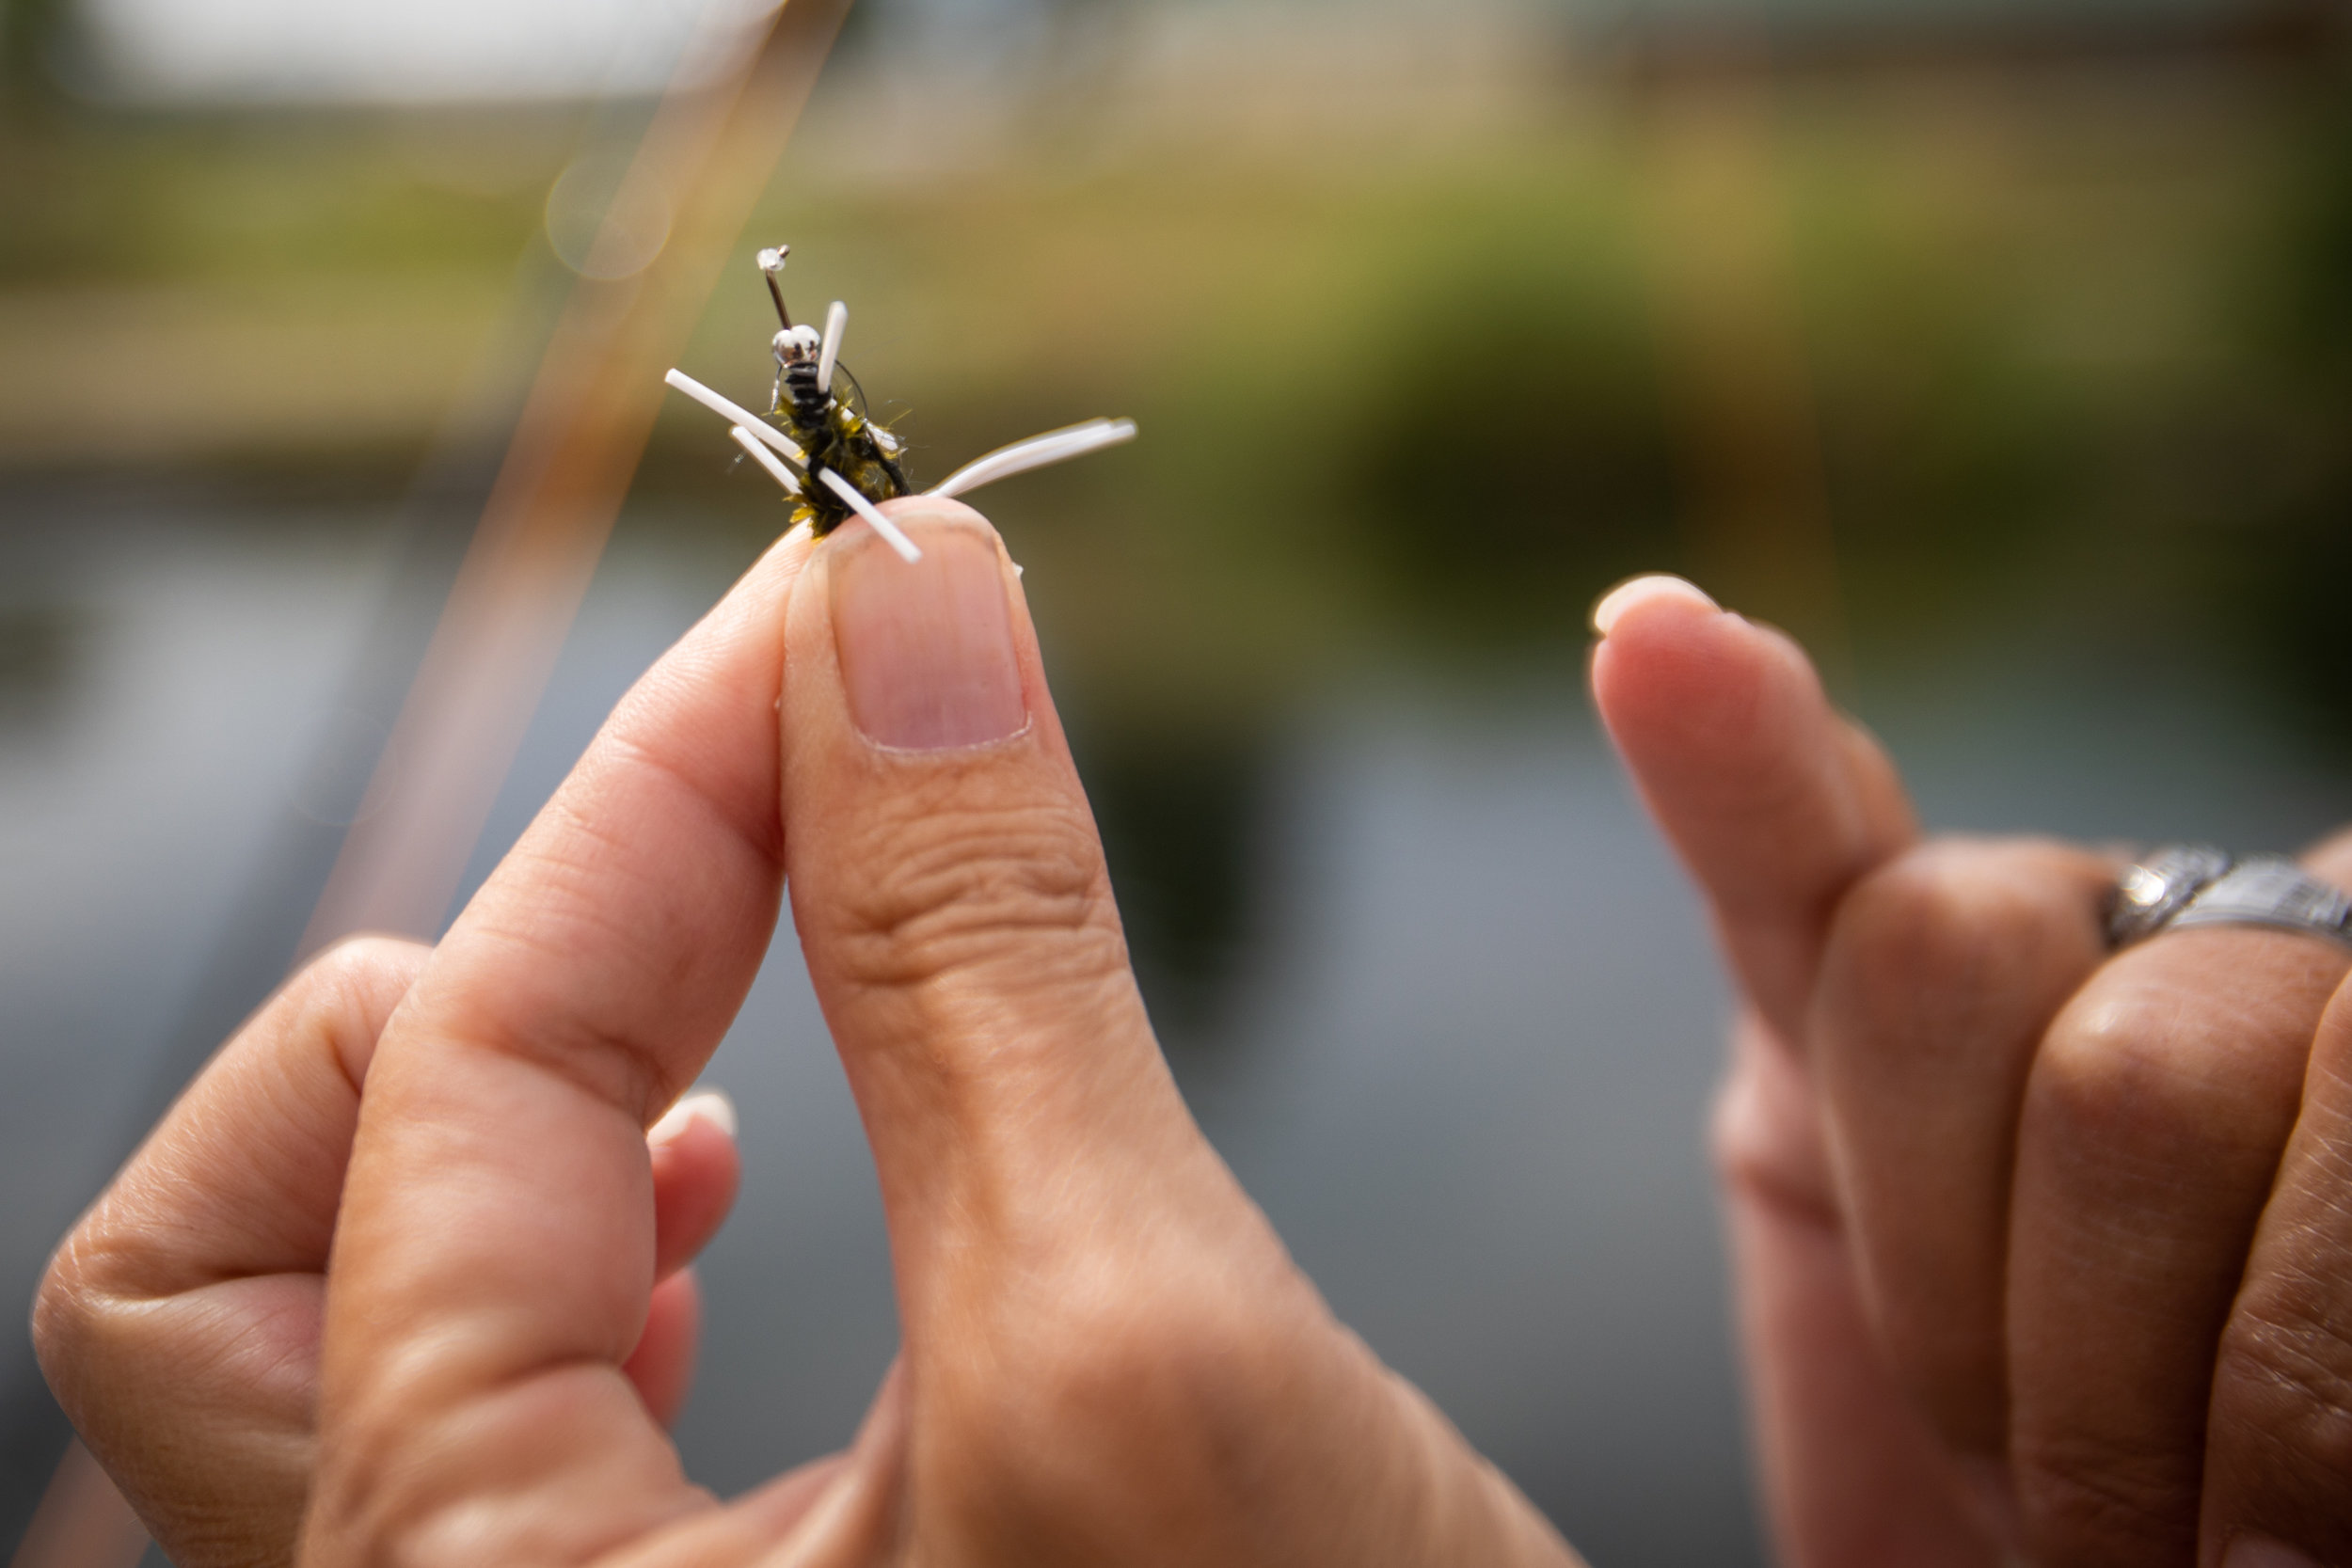  Verlicia Perez, lead mentor for The Utah Mayfly Project, points out details on a fly pattern to foster care children while fly fishing at a trout pond on Saturday, July 14, 2018, in Smithfield. The Mayfly Project is a national non-profit that uses f